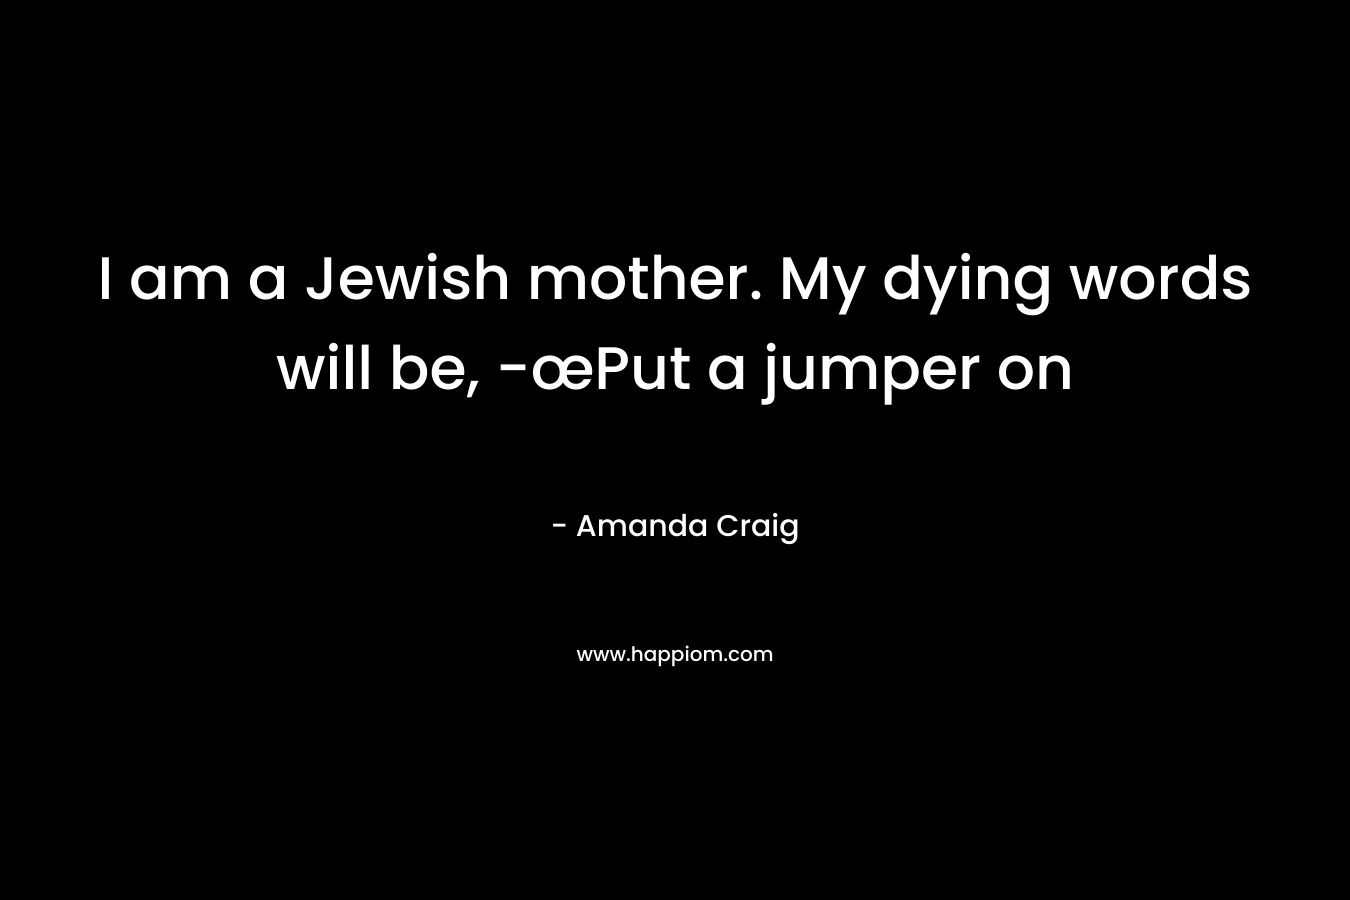 I am a Jewish mother. My dying words will be, -œPut a jumper on – Amanda Craig